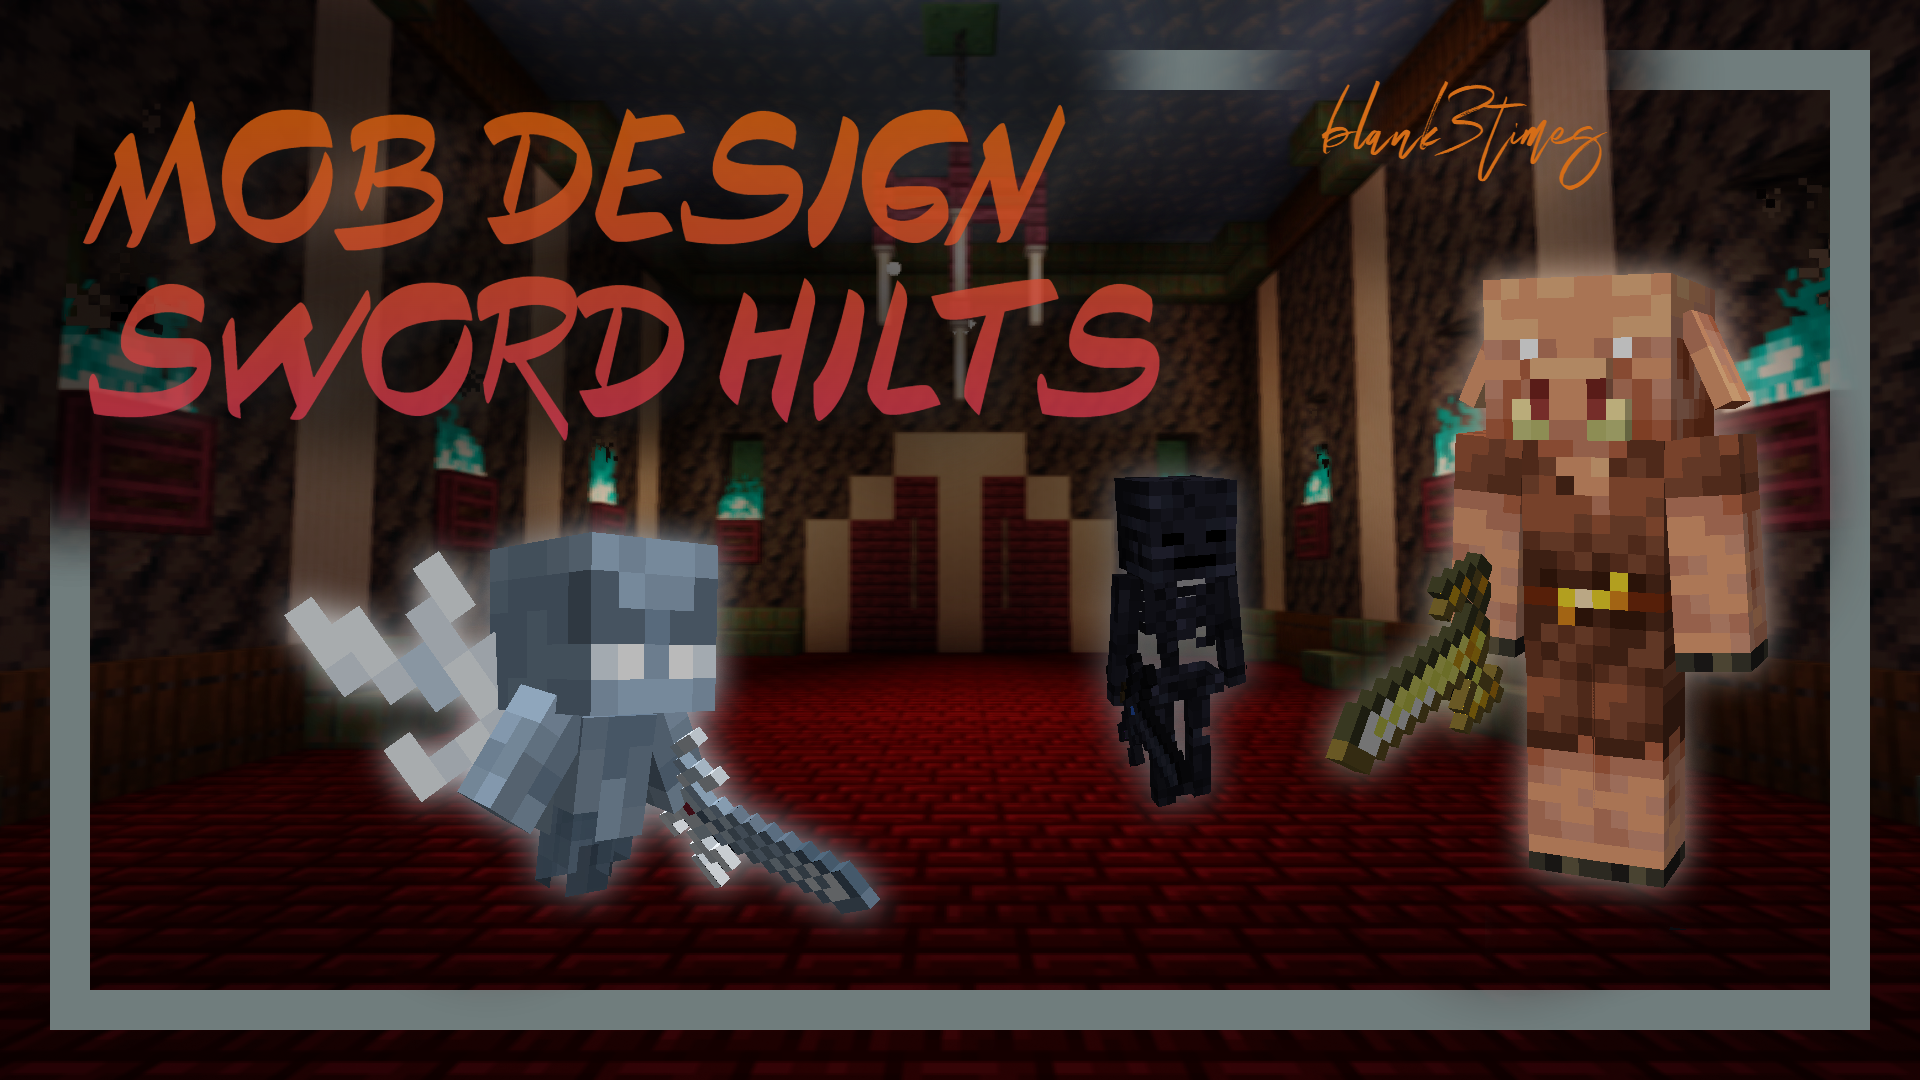 A piglin, a vex, and a wither skeleton, all holding swords with their hilts altered.